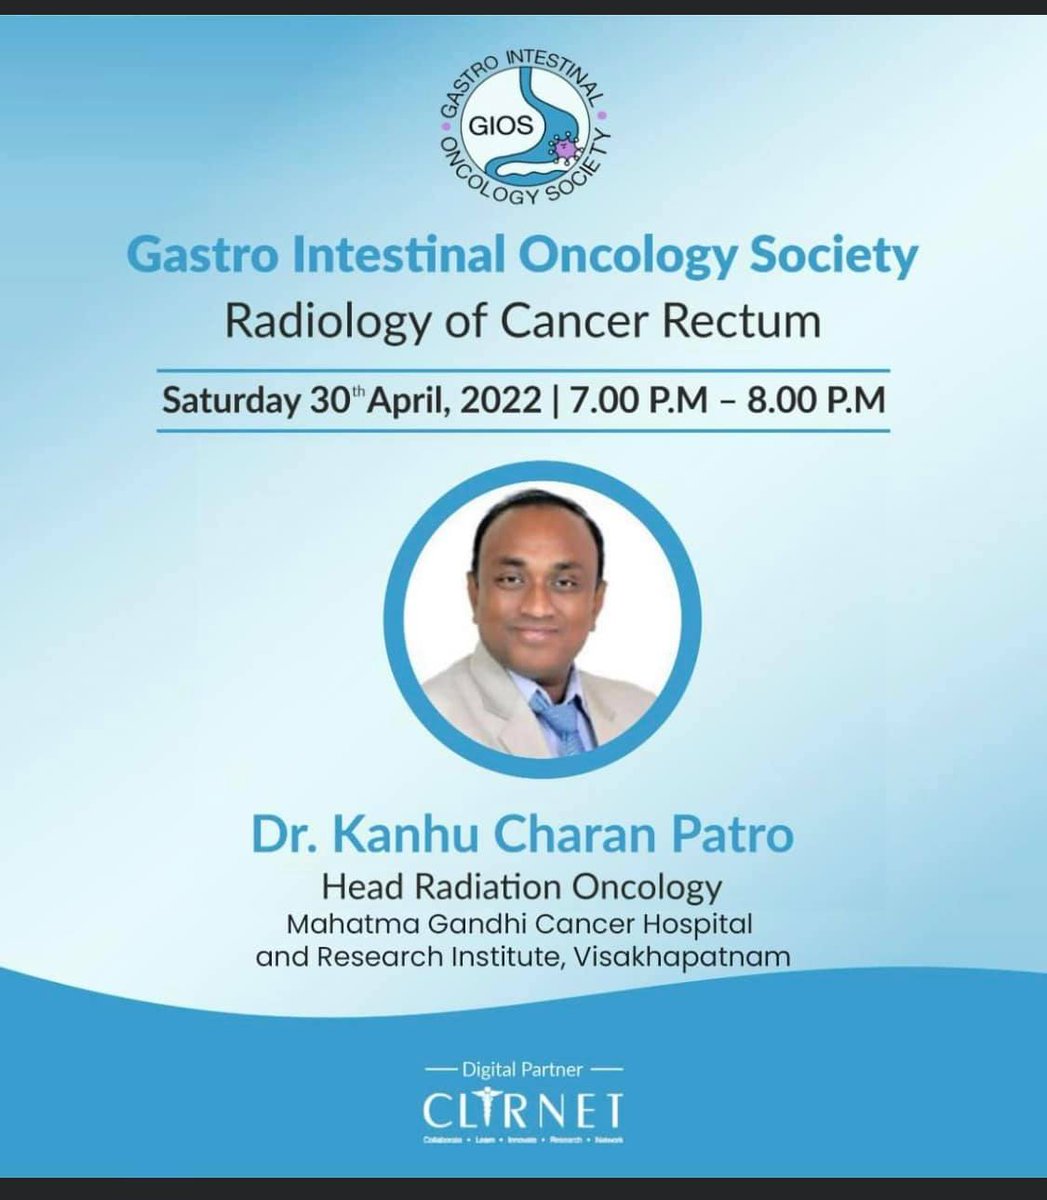 doctor.clirnet.com/mastercast/con…
#rectalCancer
#OncologyImaging
#GIOS